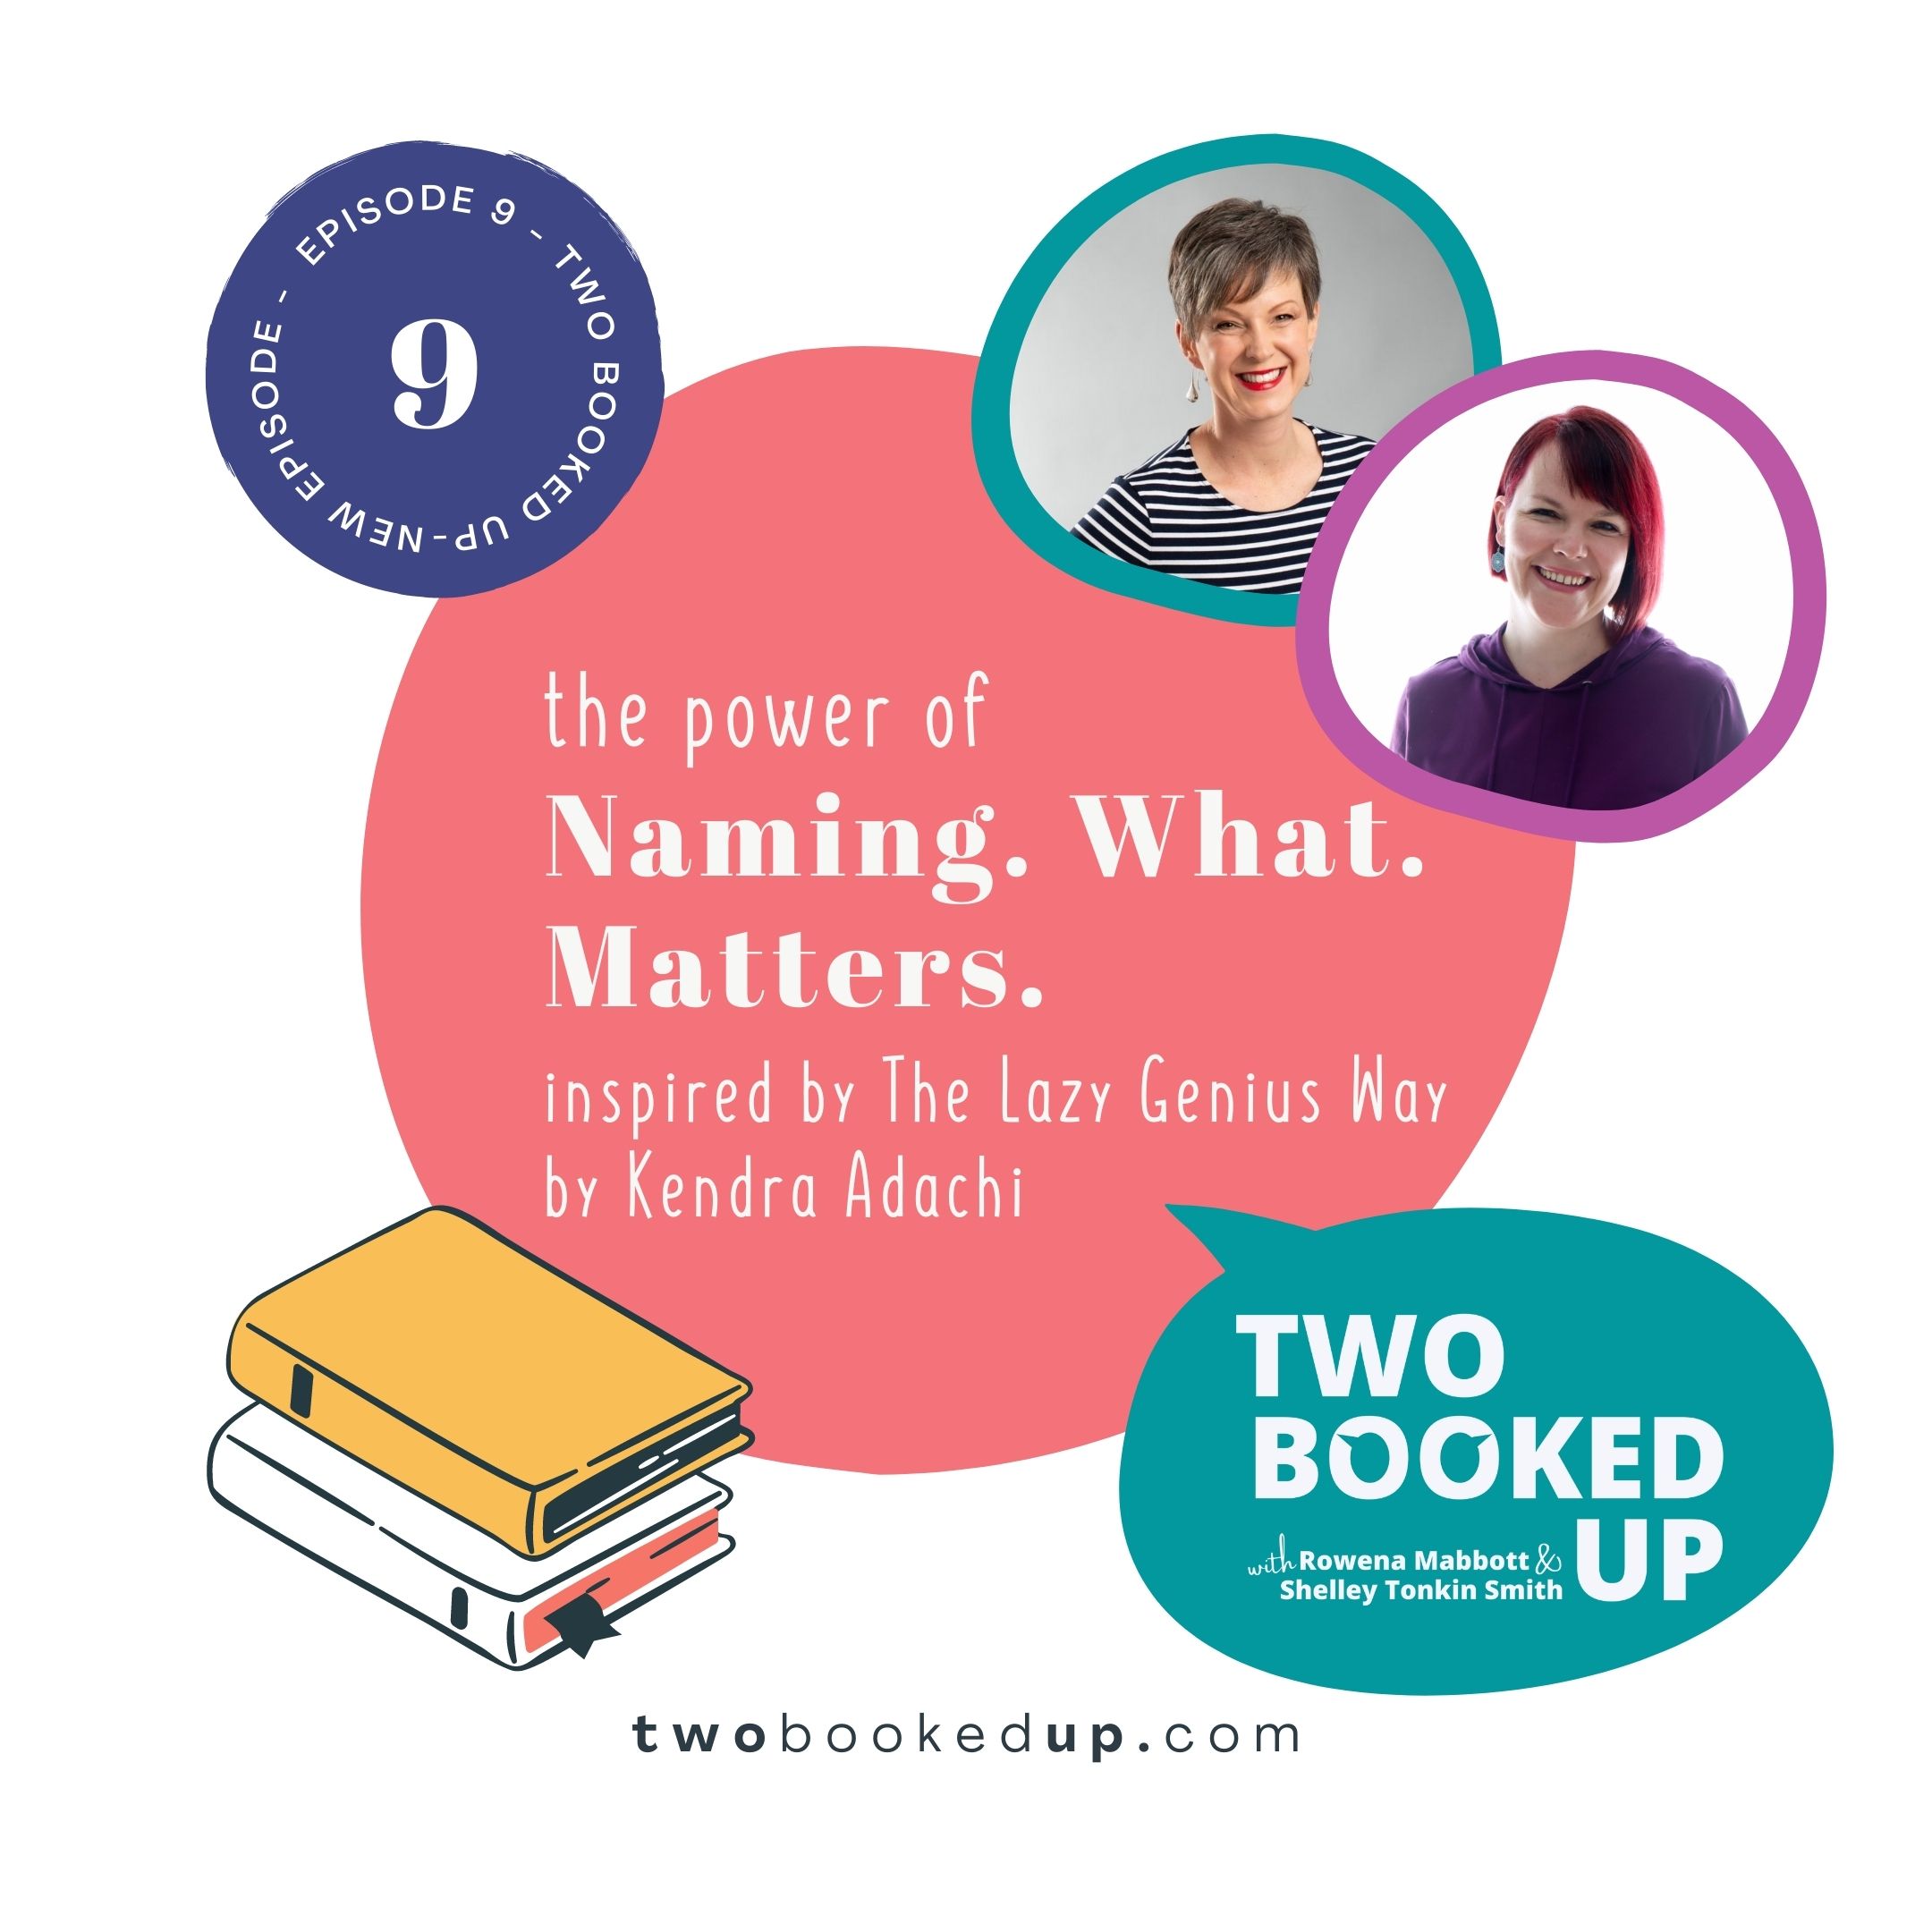 TBU#9 The Power of “Naming What Matters” (inspired by The Lazy Genius Way by Kendra Adachi)